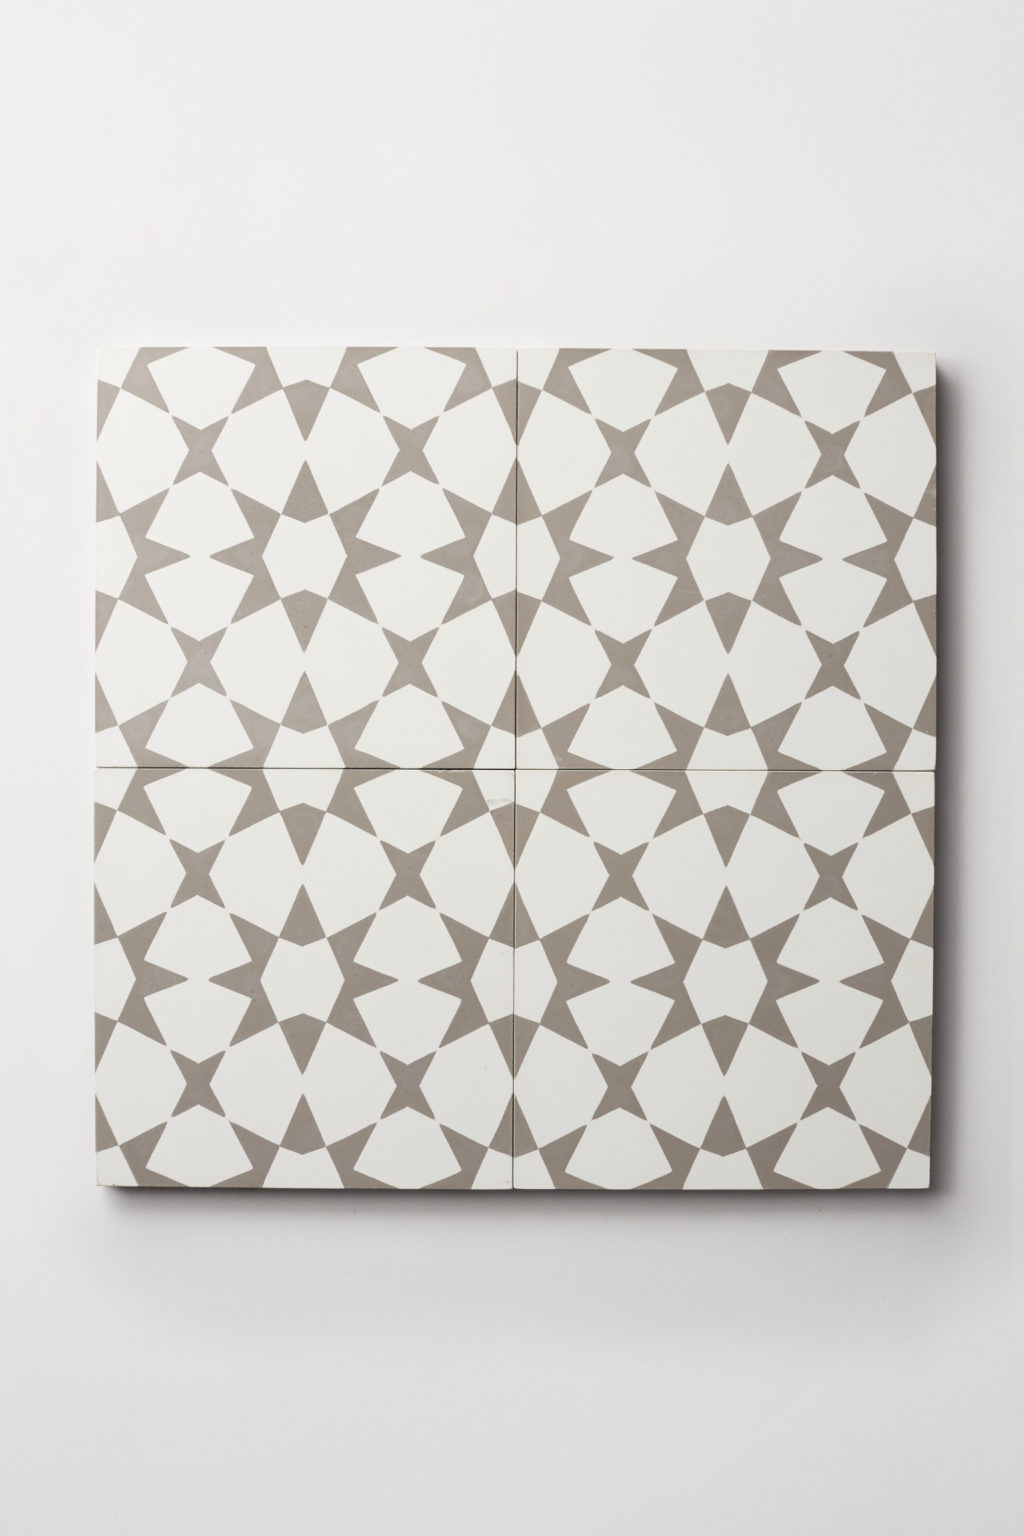 C21644-cle-tile-cement-pattern-square-winter19-moroccan-fez-white-metal-2.0-single-3600×2400